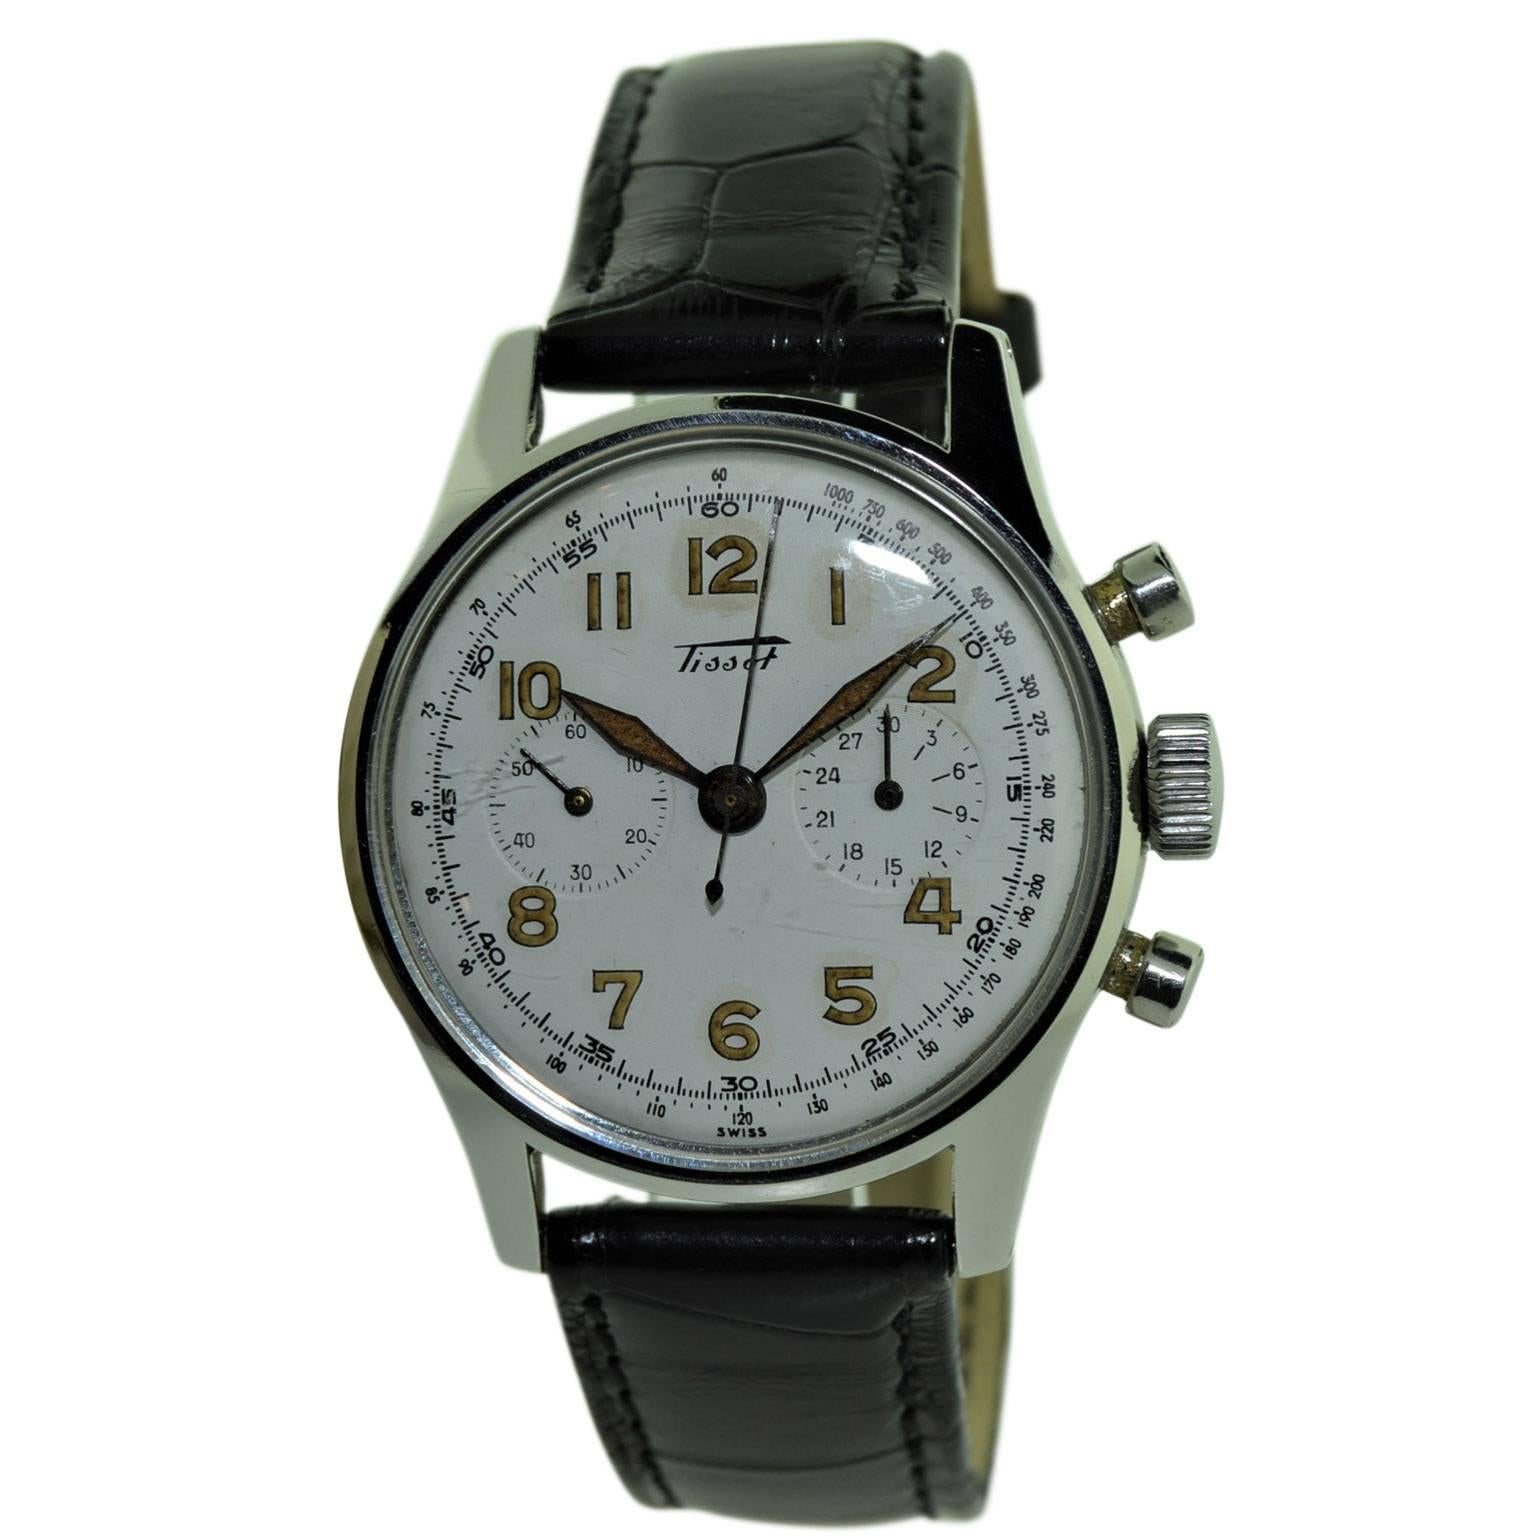 FACTORY / HOUSE: Tissot Watch Company
STYLE / REFERENCE: Round / Art Deco
METAL / MATERIAL: Stainless Steel 
CIRCA: 1950's
DIMENSIONS: Length 42mm X Diameter 34mm
MOVEMENT / CALIBER: Manual Winding / 17 Jewels / Cal. Valjoux
DIAL / HANDS: Silvered